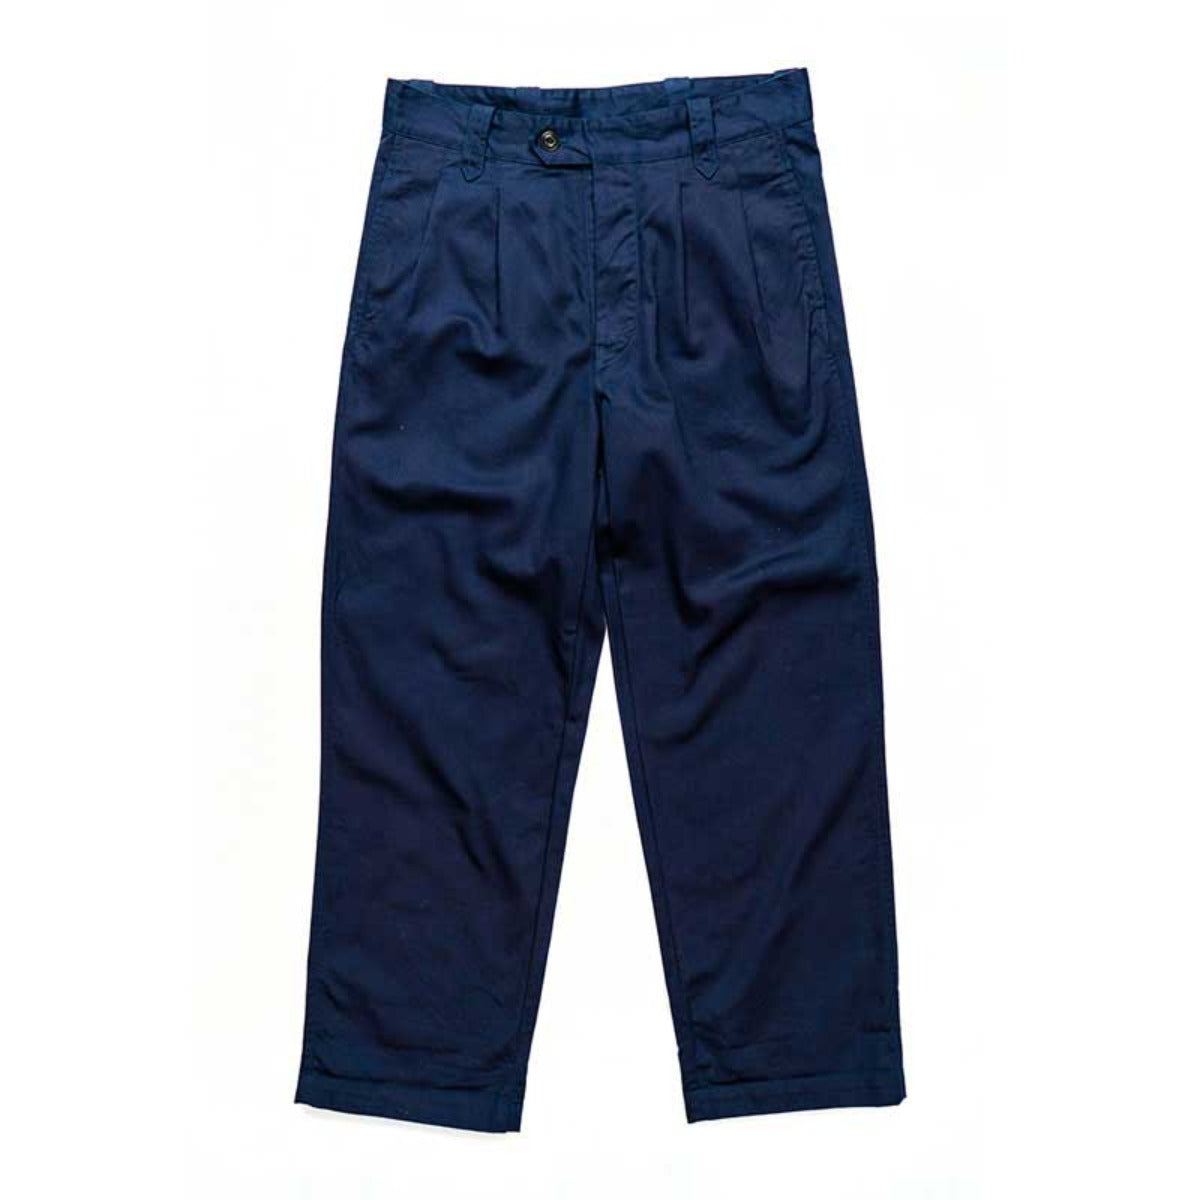 The Workwear Trouser is a perfect amalgamation of all workwear trousers of times past. Yarmouth Oilskins have transformed the workwear trouser from years of adaptations. It is such a timeless workwear garment that has a real heir of authority and stature